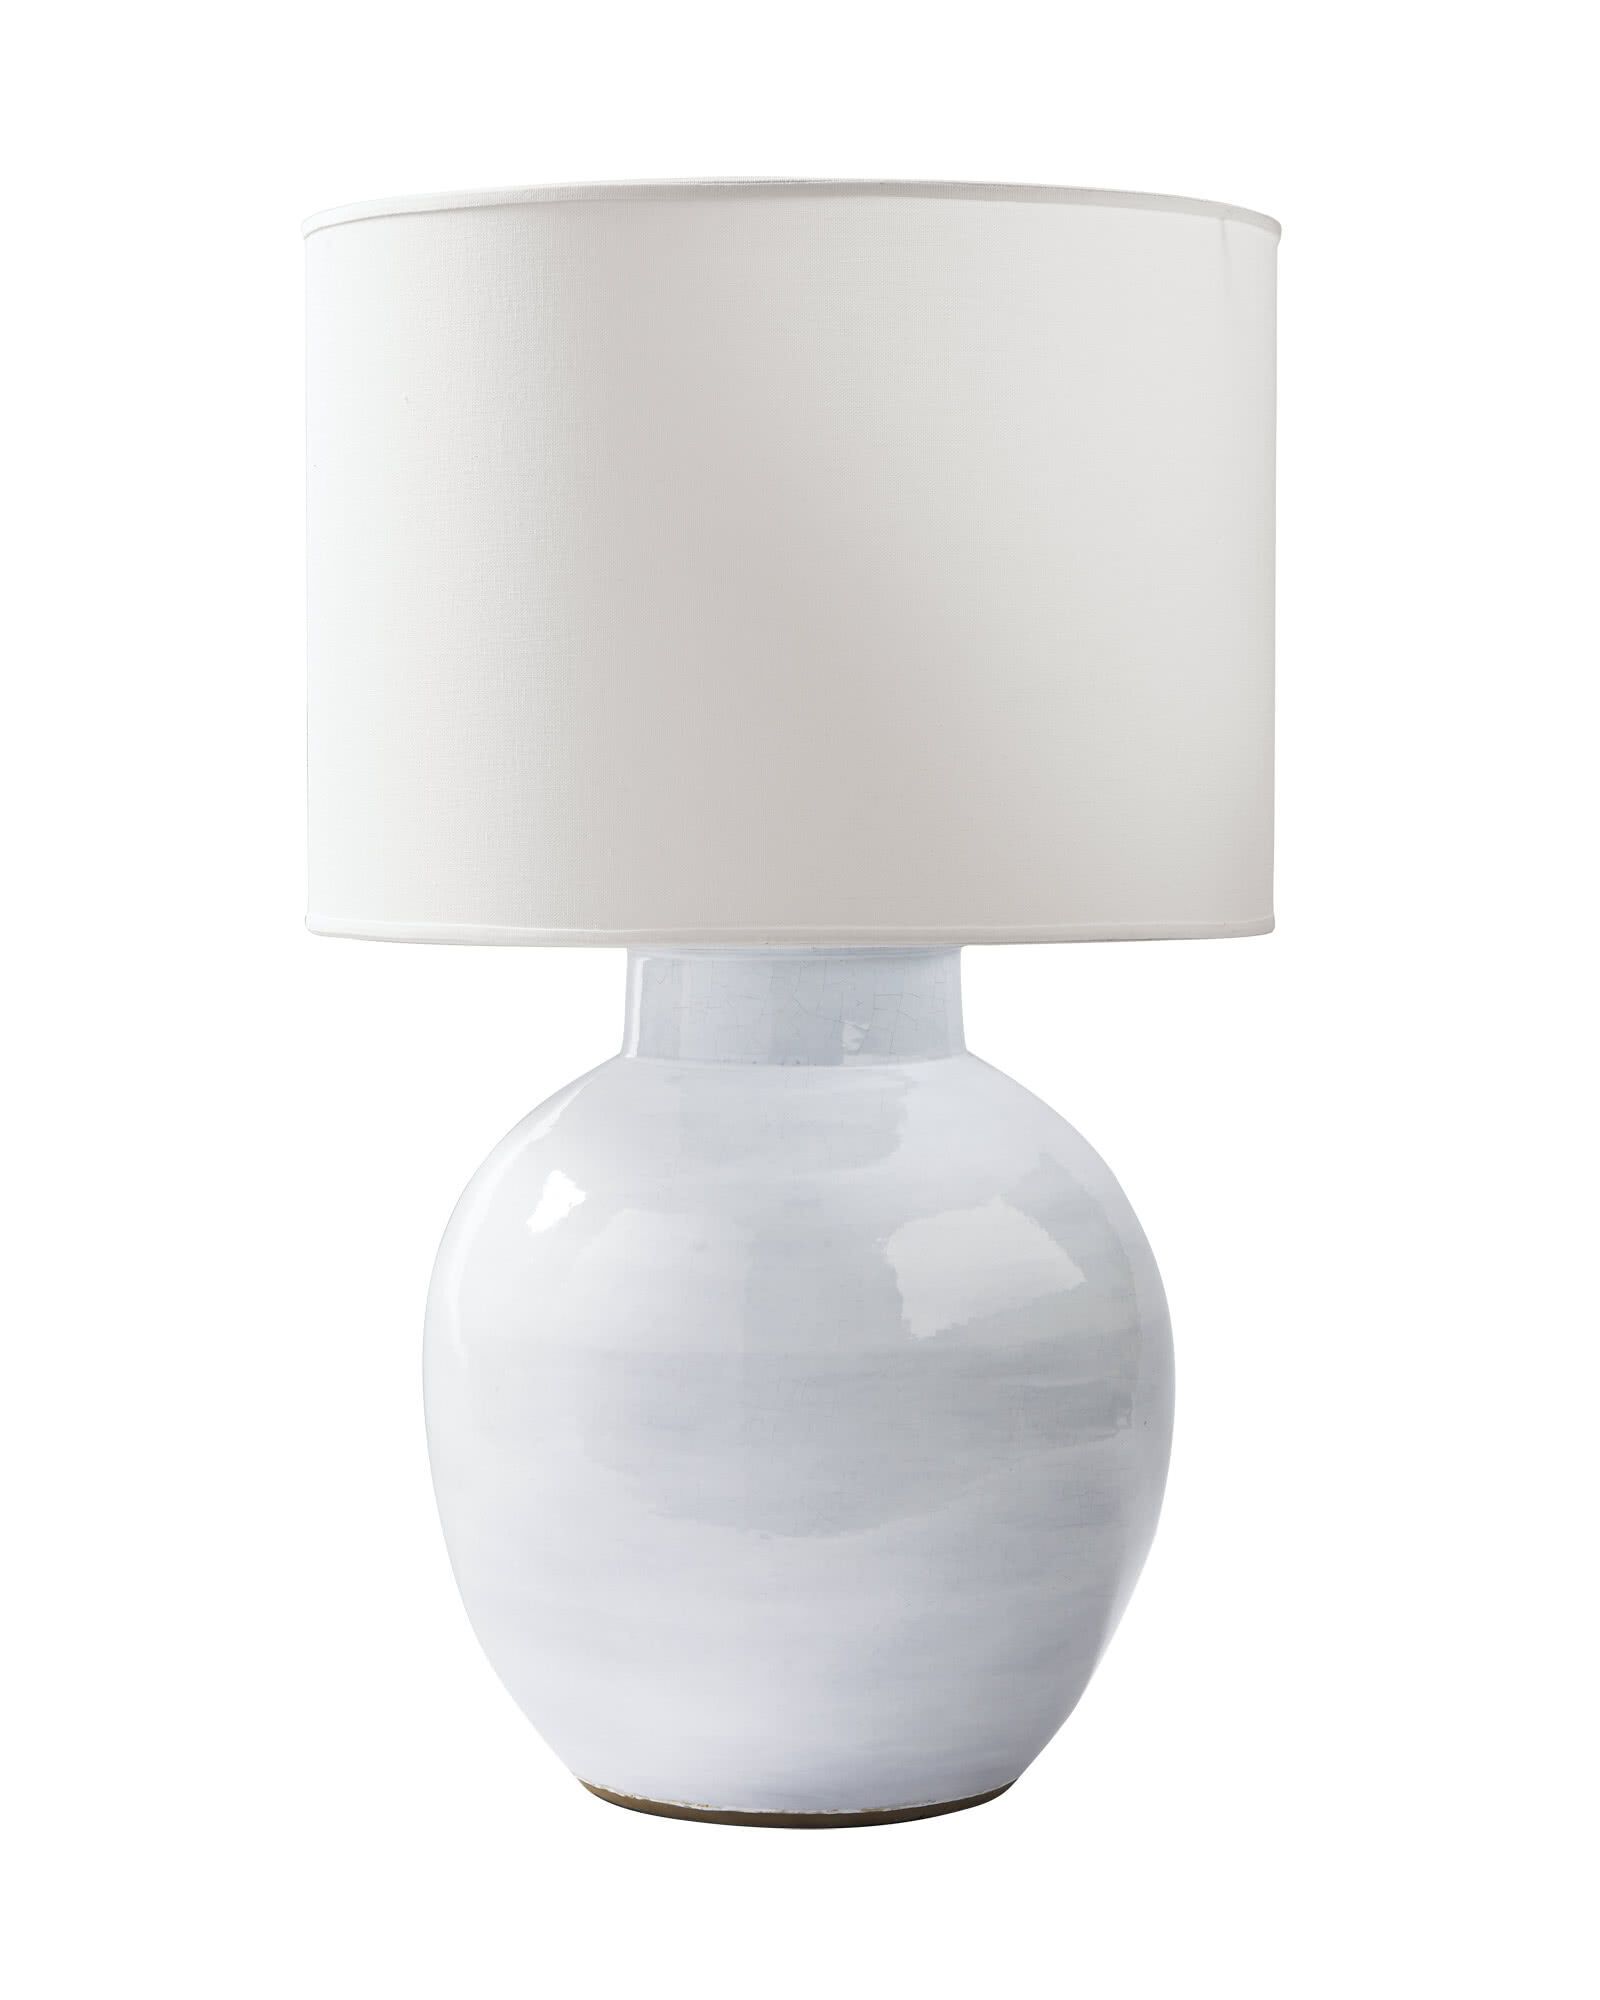 Morris Table Lamp | Serena and Lily